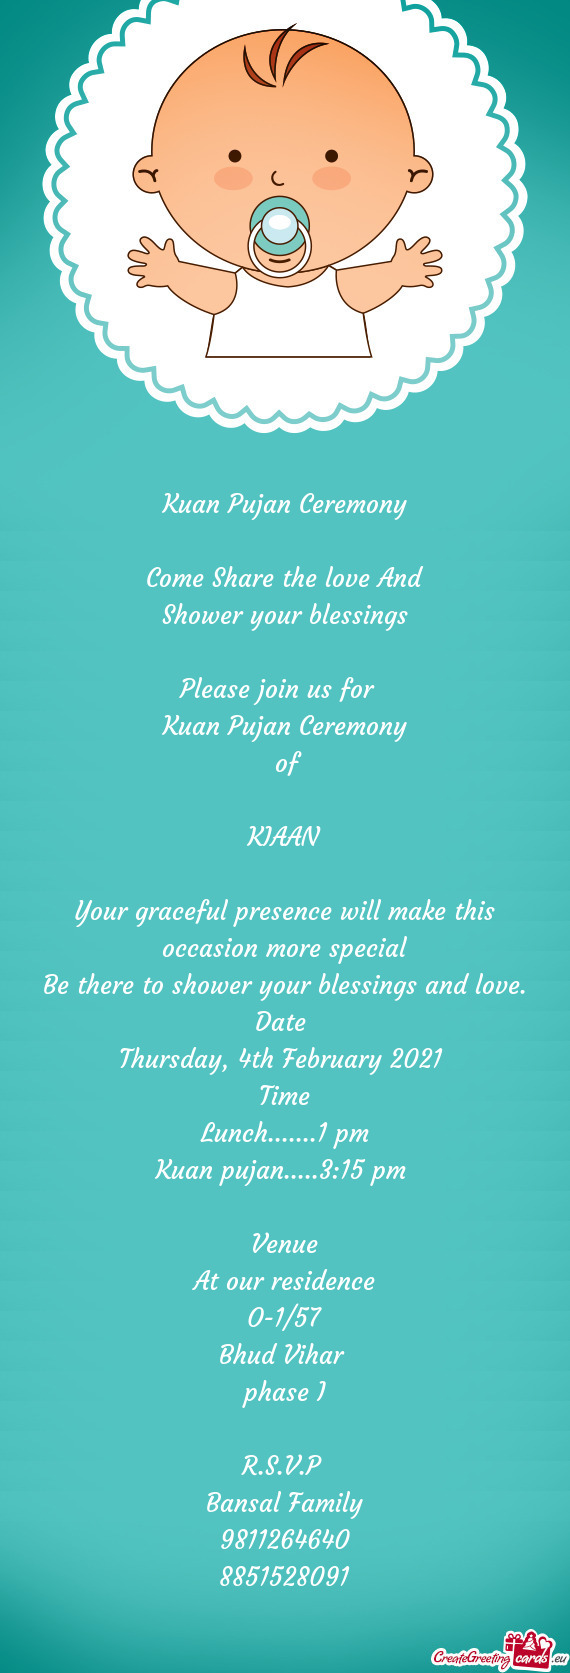 Kuan Pujan Ceremony
 
 Come Share the love And
 Shower your blessings
 
 Please join us for 
 Kuan